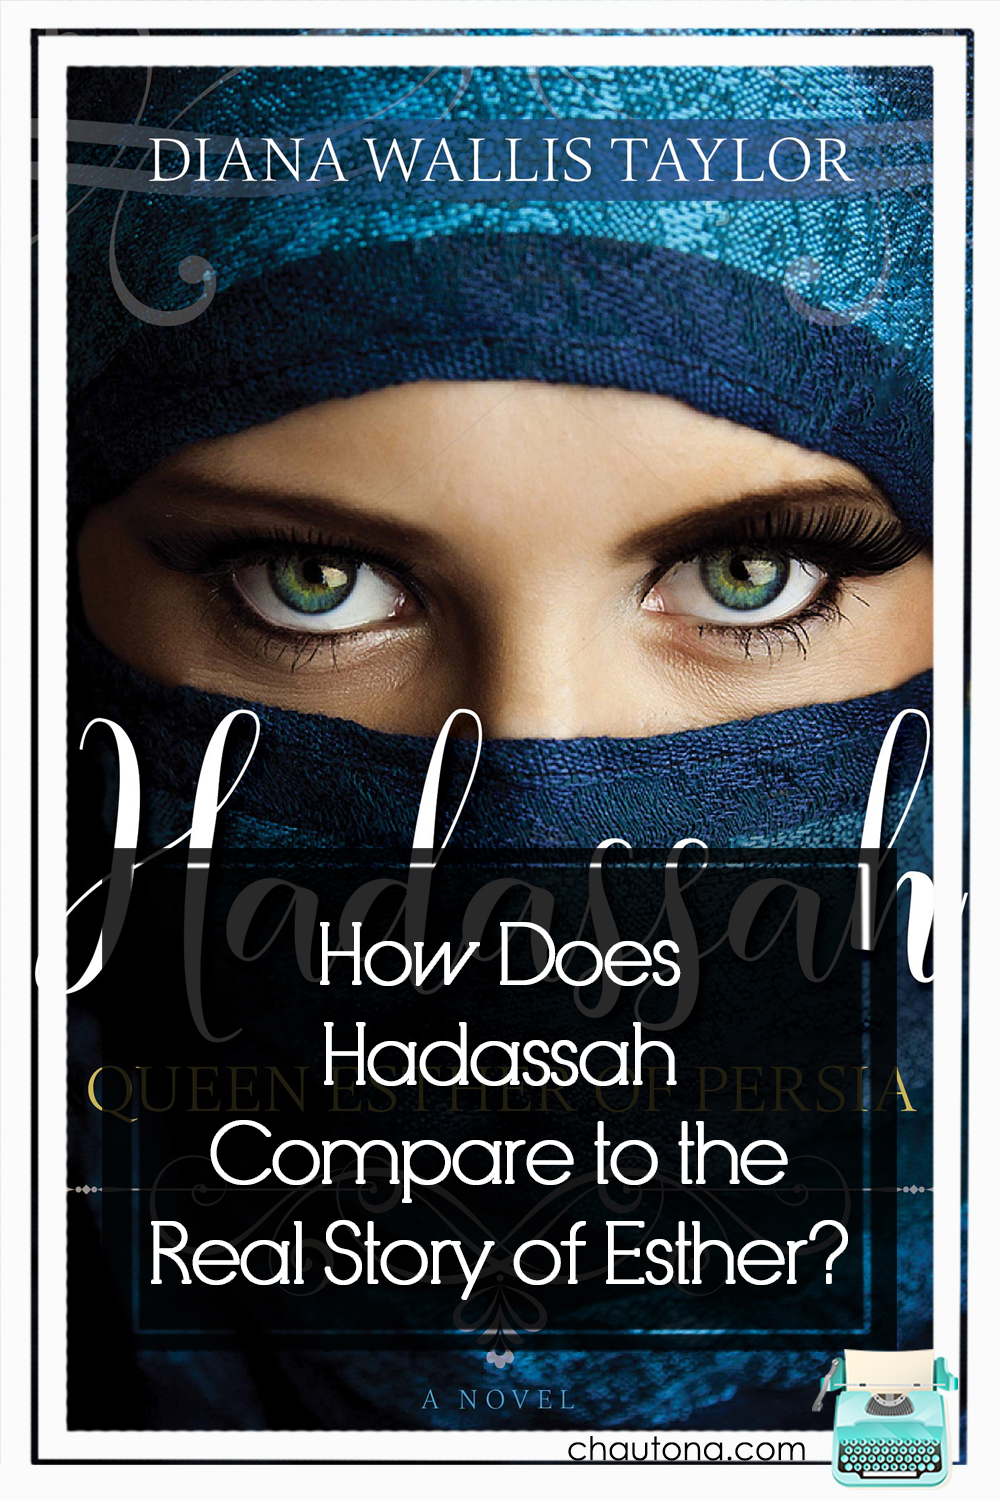 Hadassah--otherwise known as Queen Esther. What do we really know about her and the culture she lived in and how did that affect this retelling? via @chautonahavig